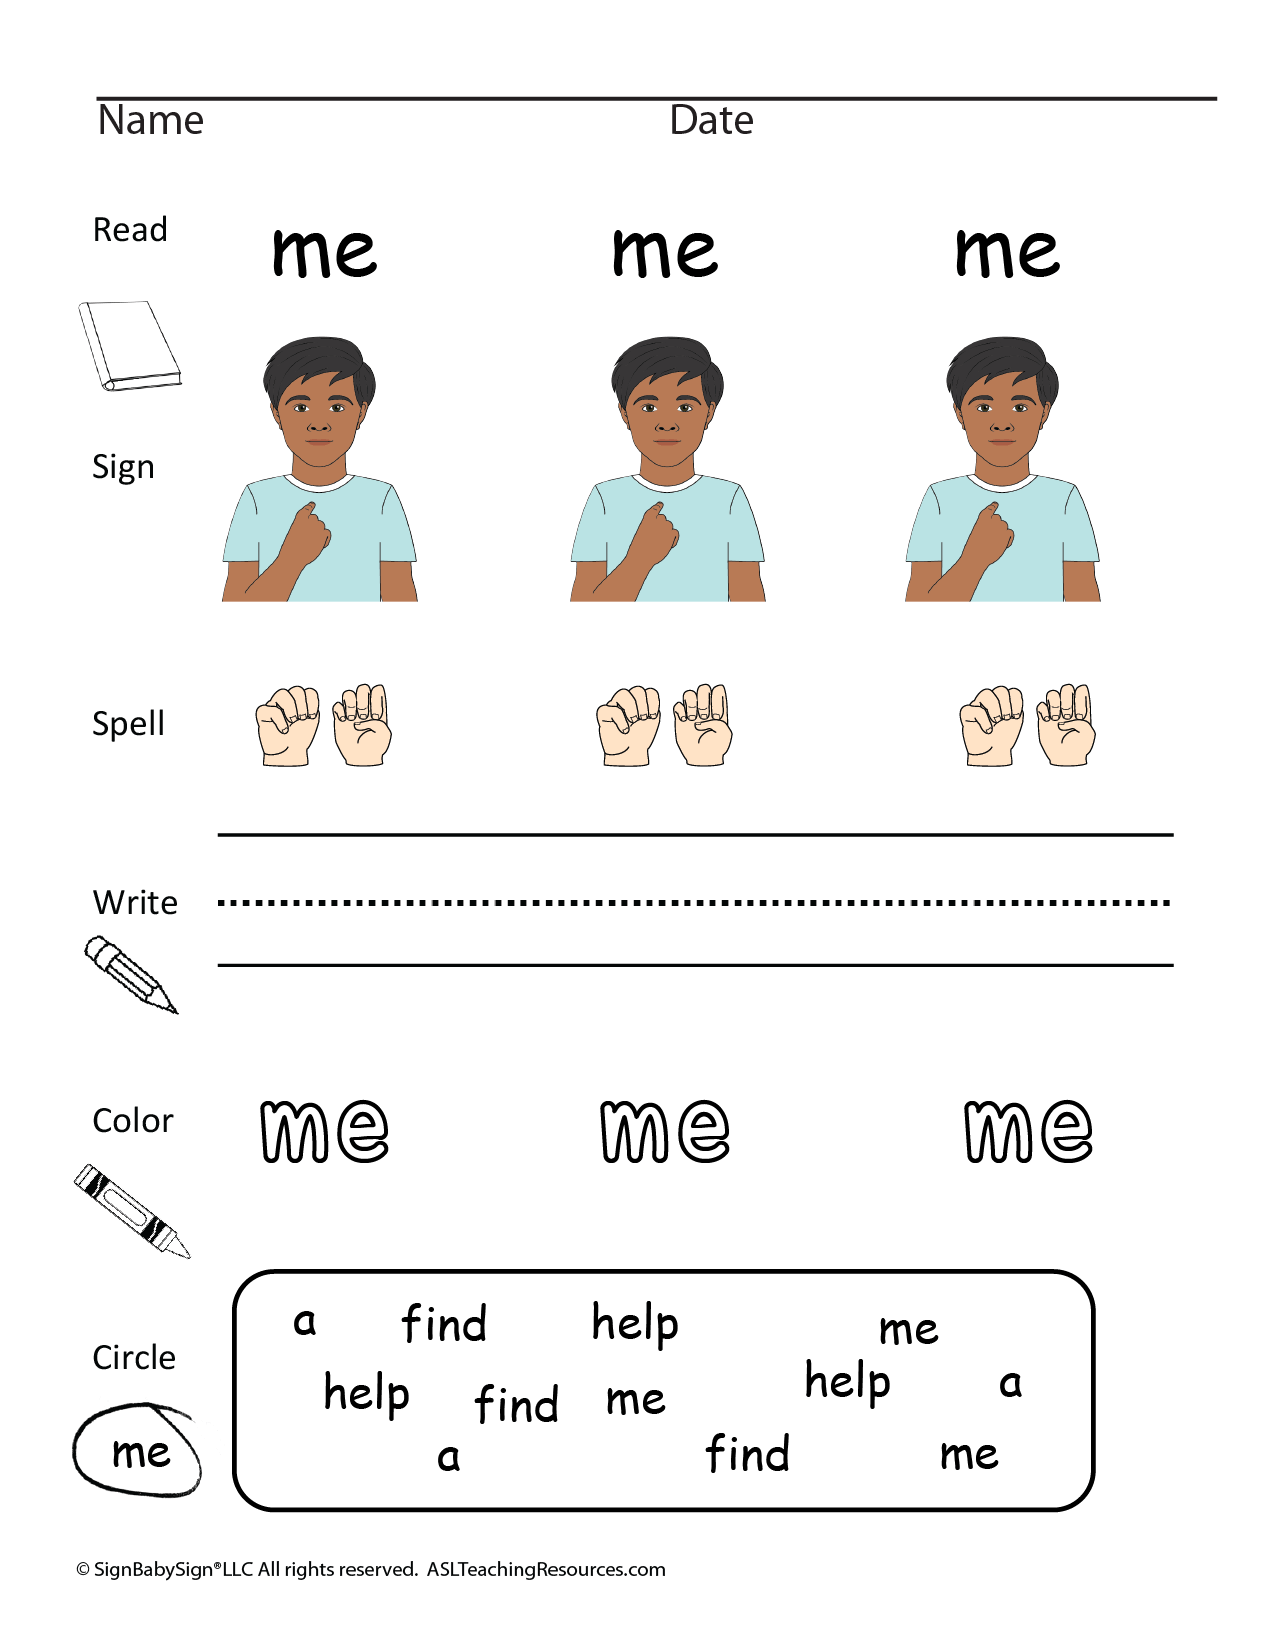 sight-words-worksheets-help-me-find-a-asl-teaching-resources